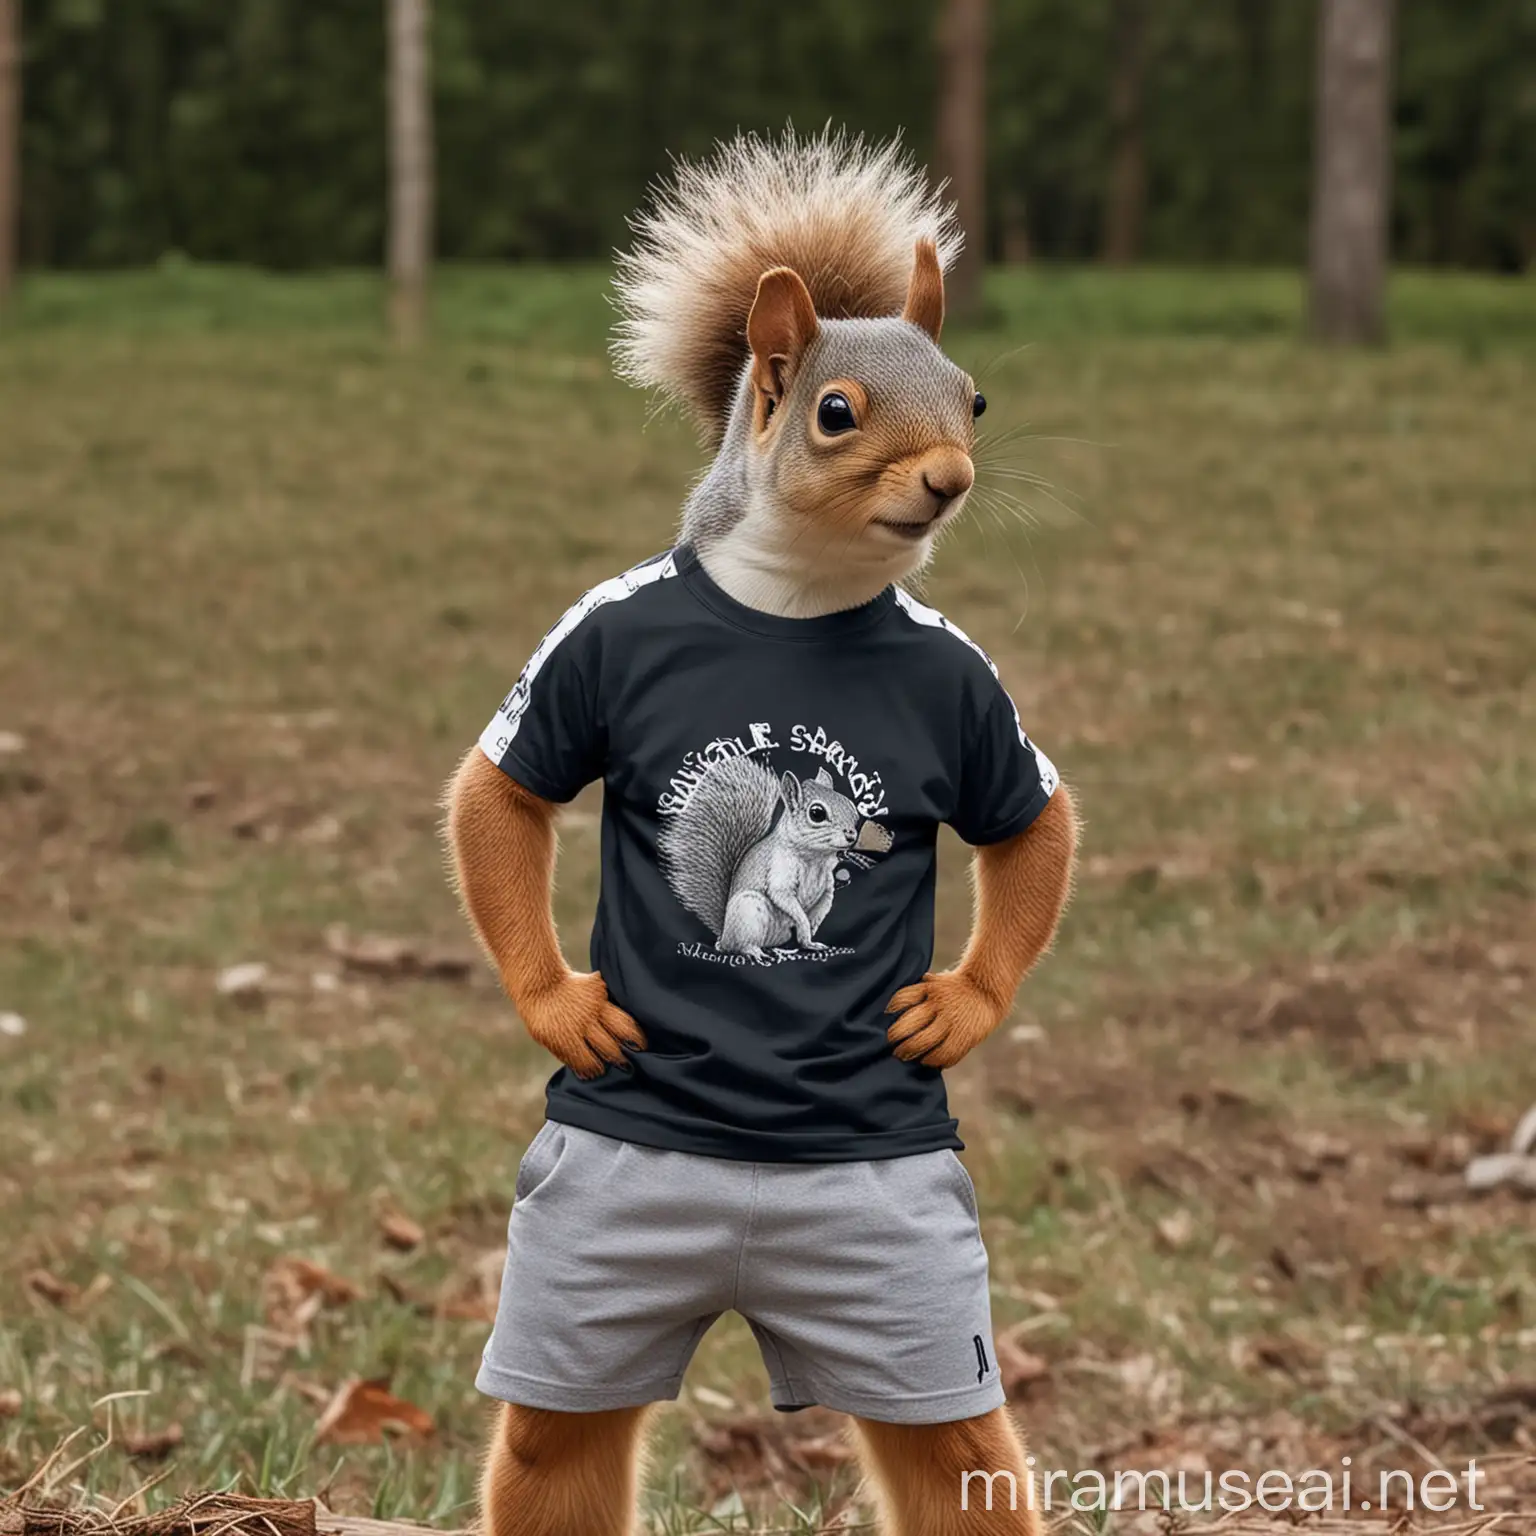 A squirrel with a mullet haircut wearing sport short ans sport t-shirt